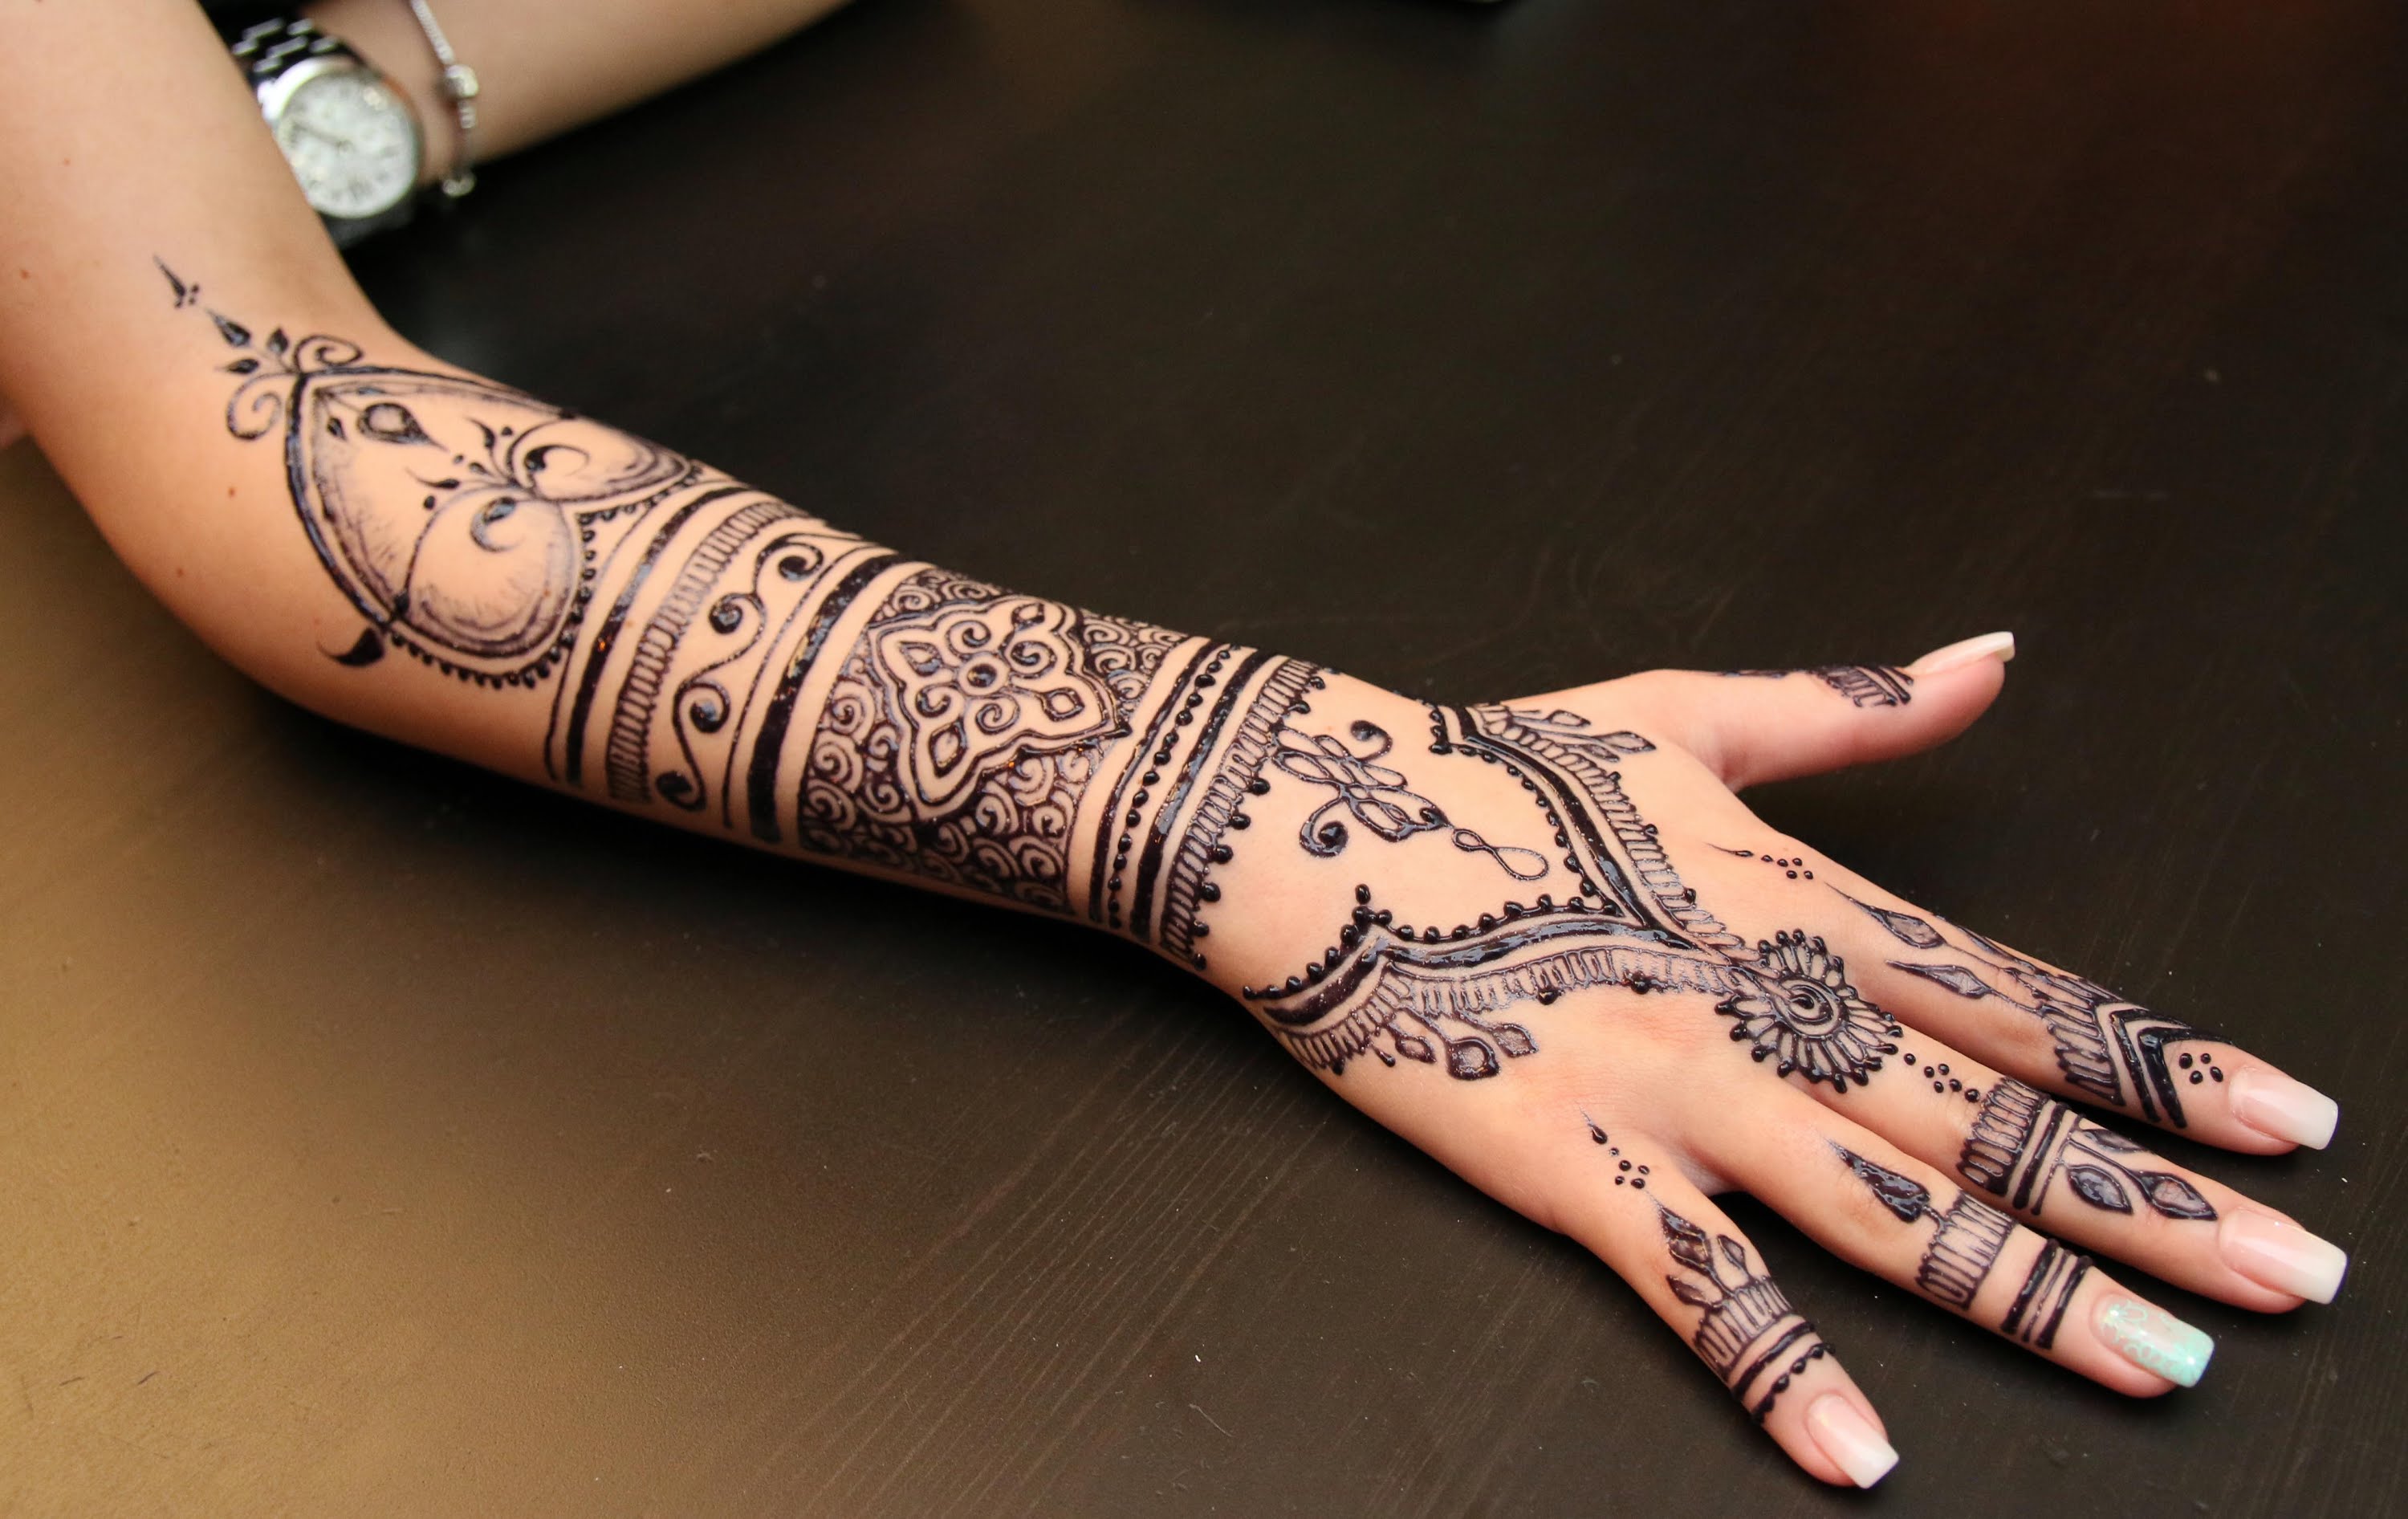 Is Henna a blessing or a curse?